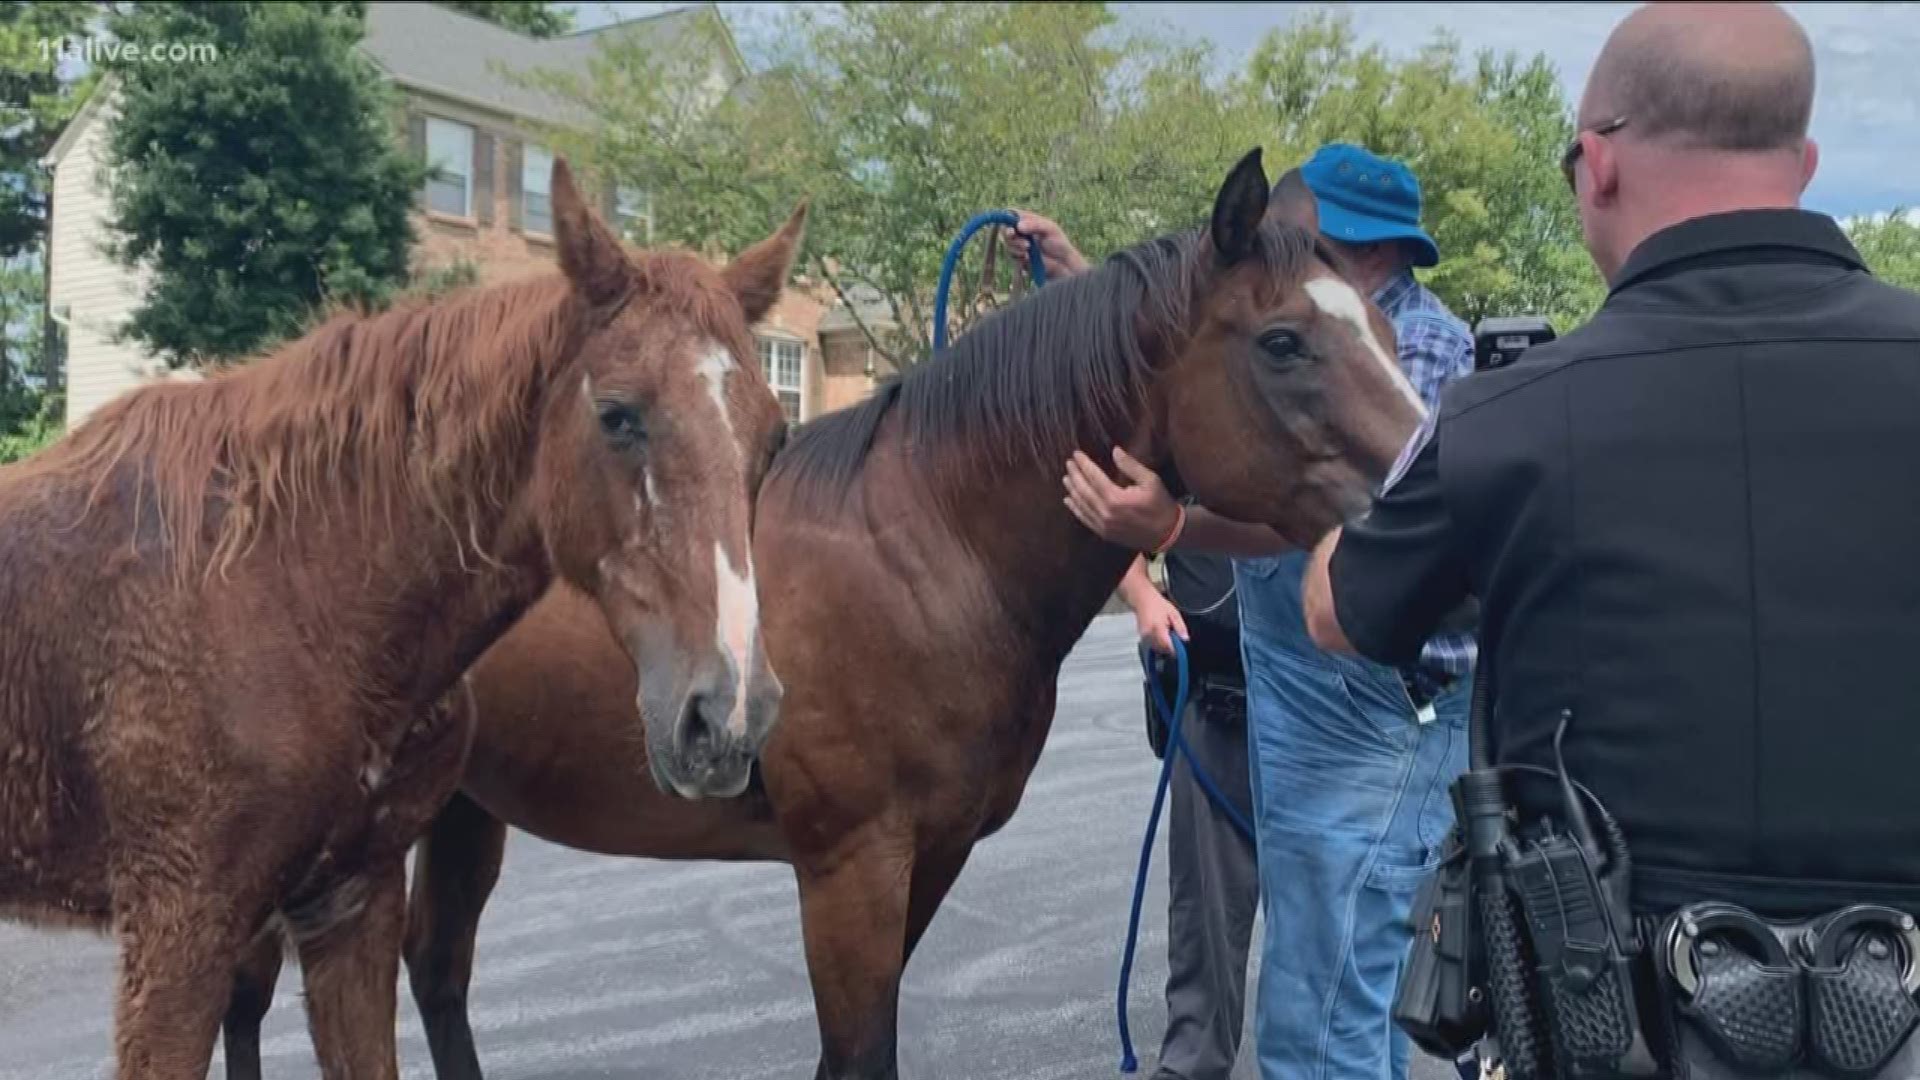 The horses were returned to their owner.